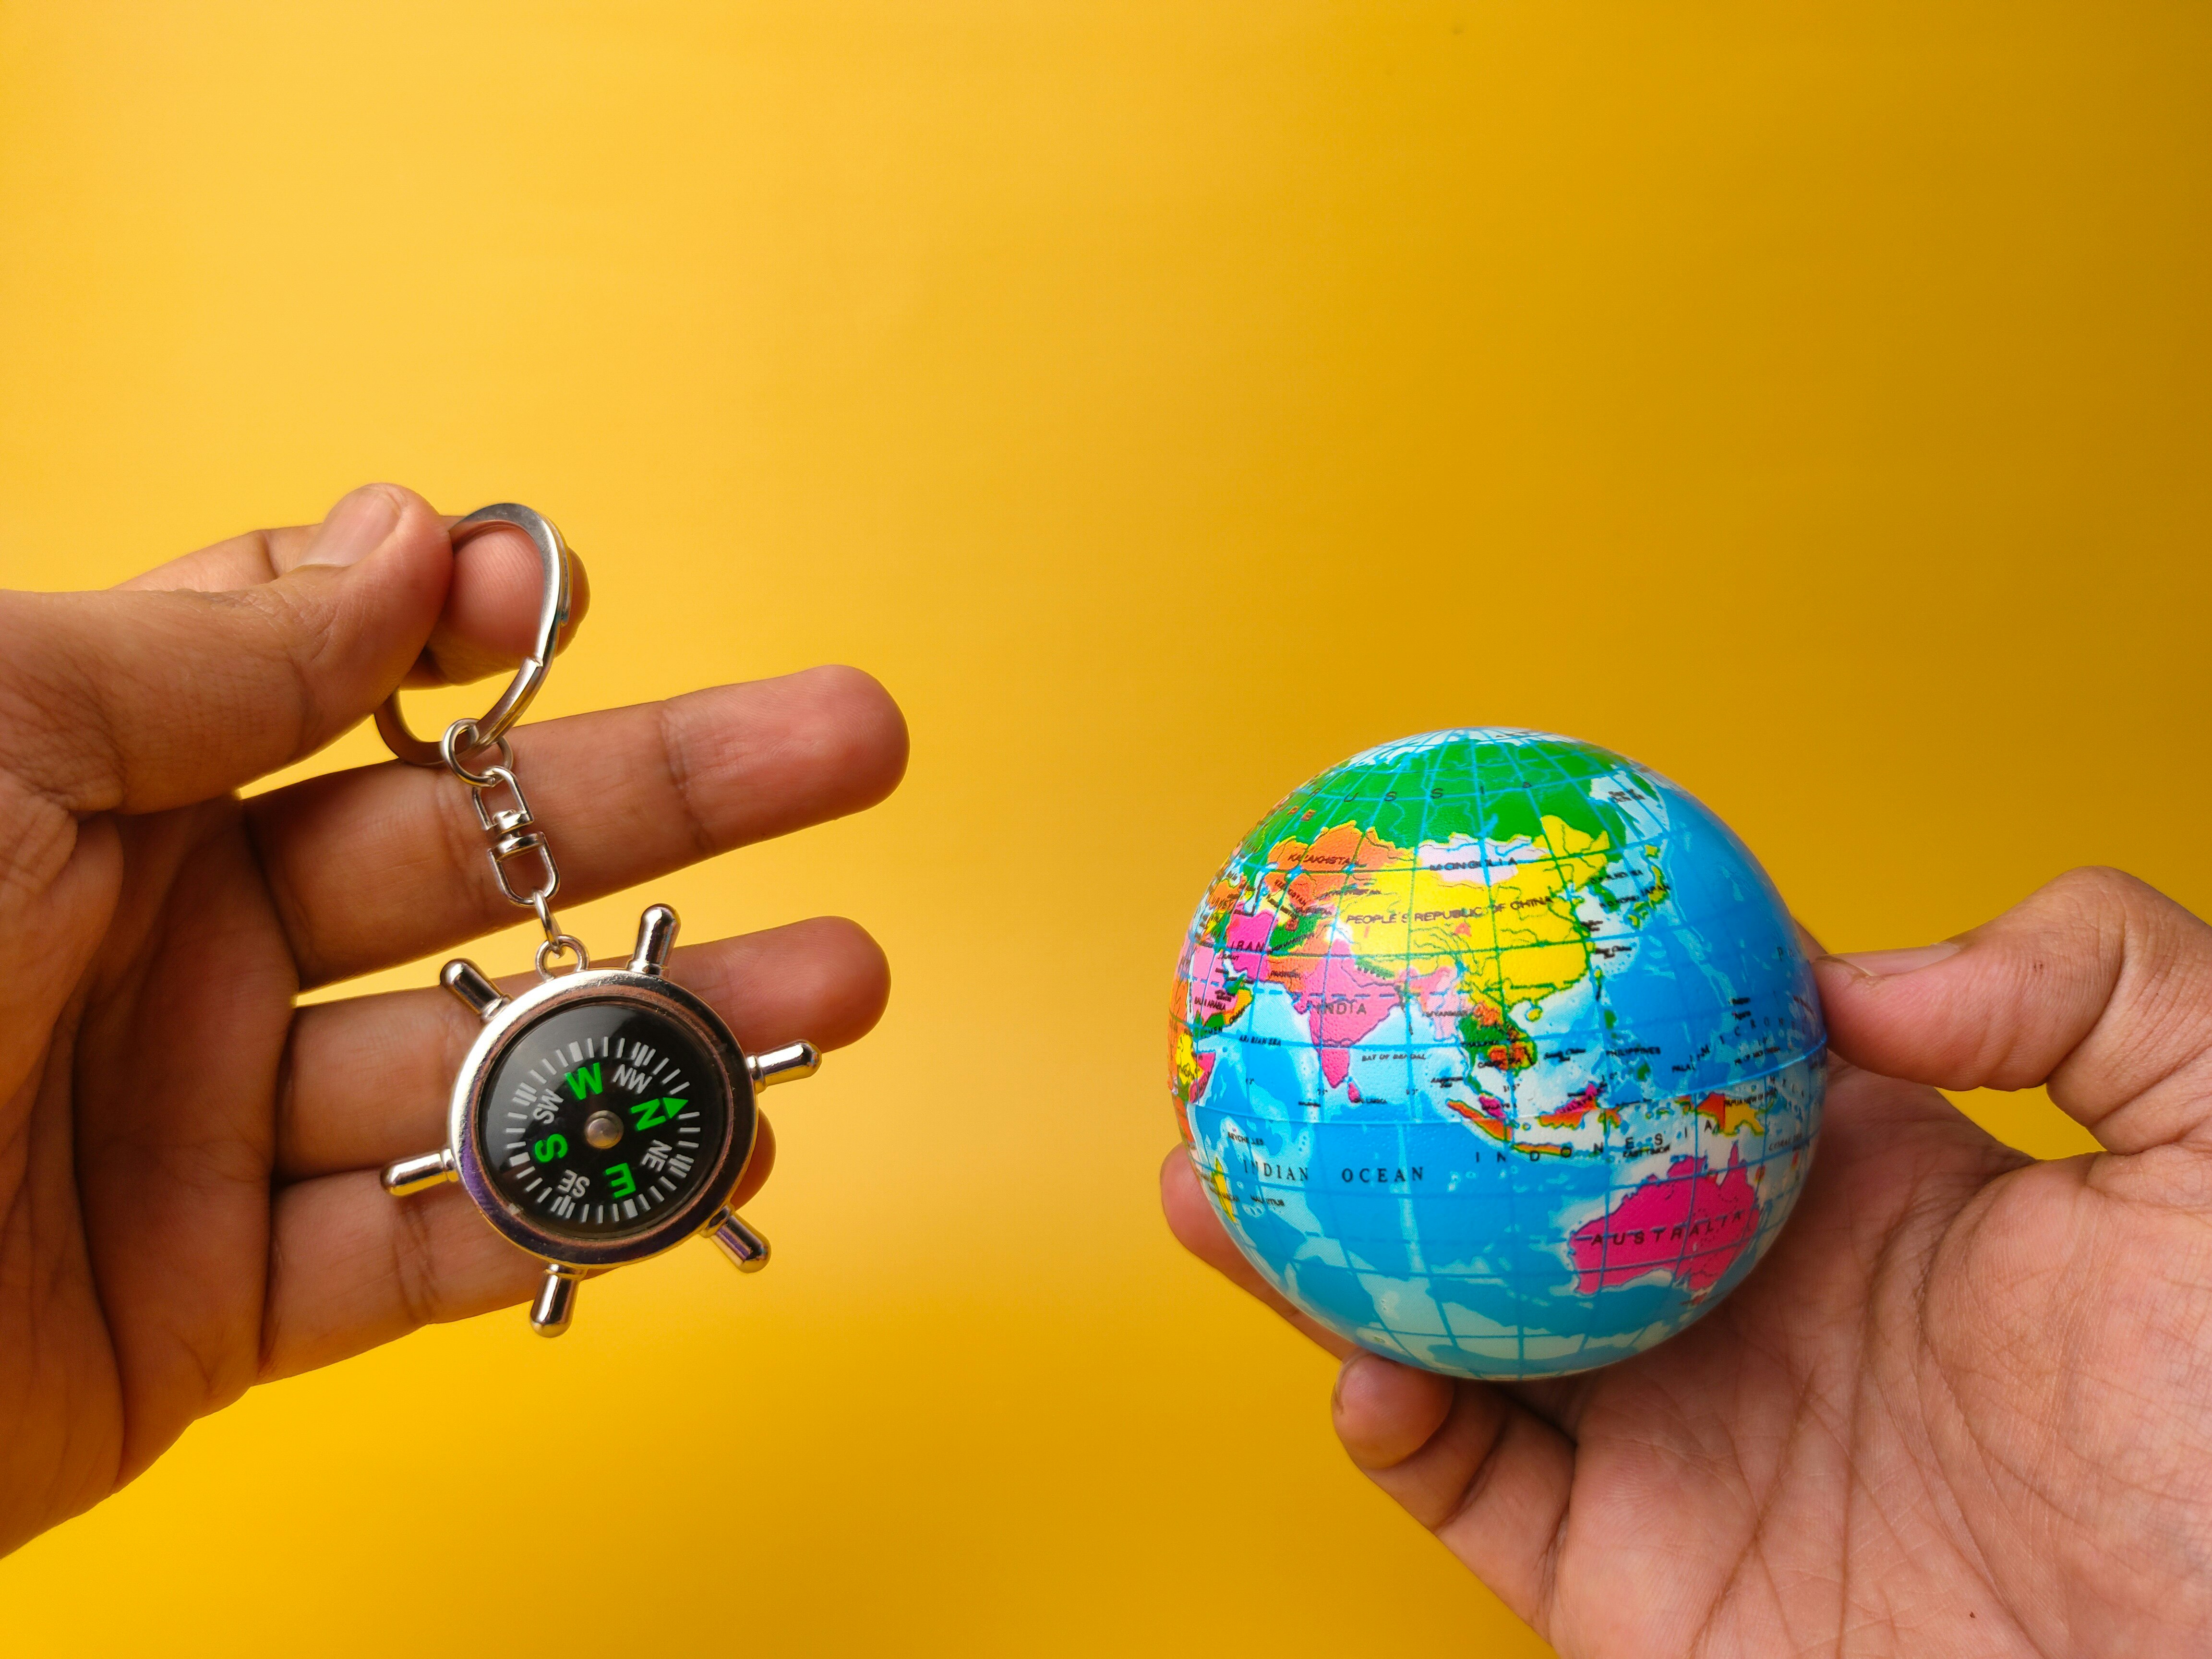 Hand holding earth globe and compass on yellow background.